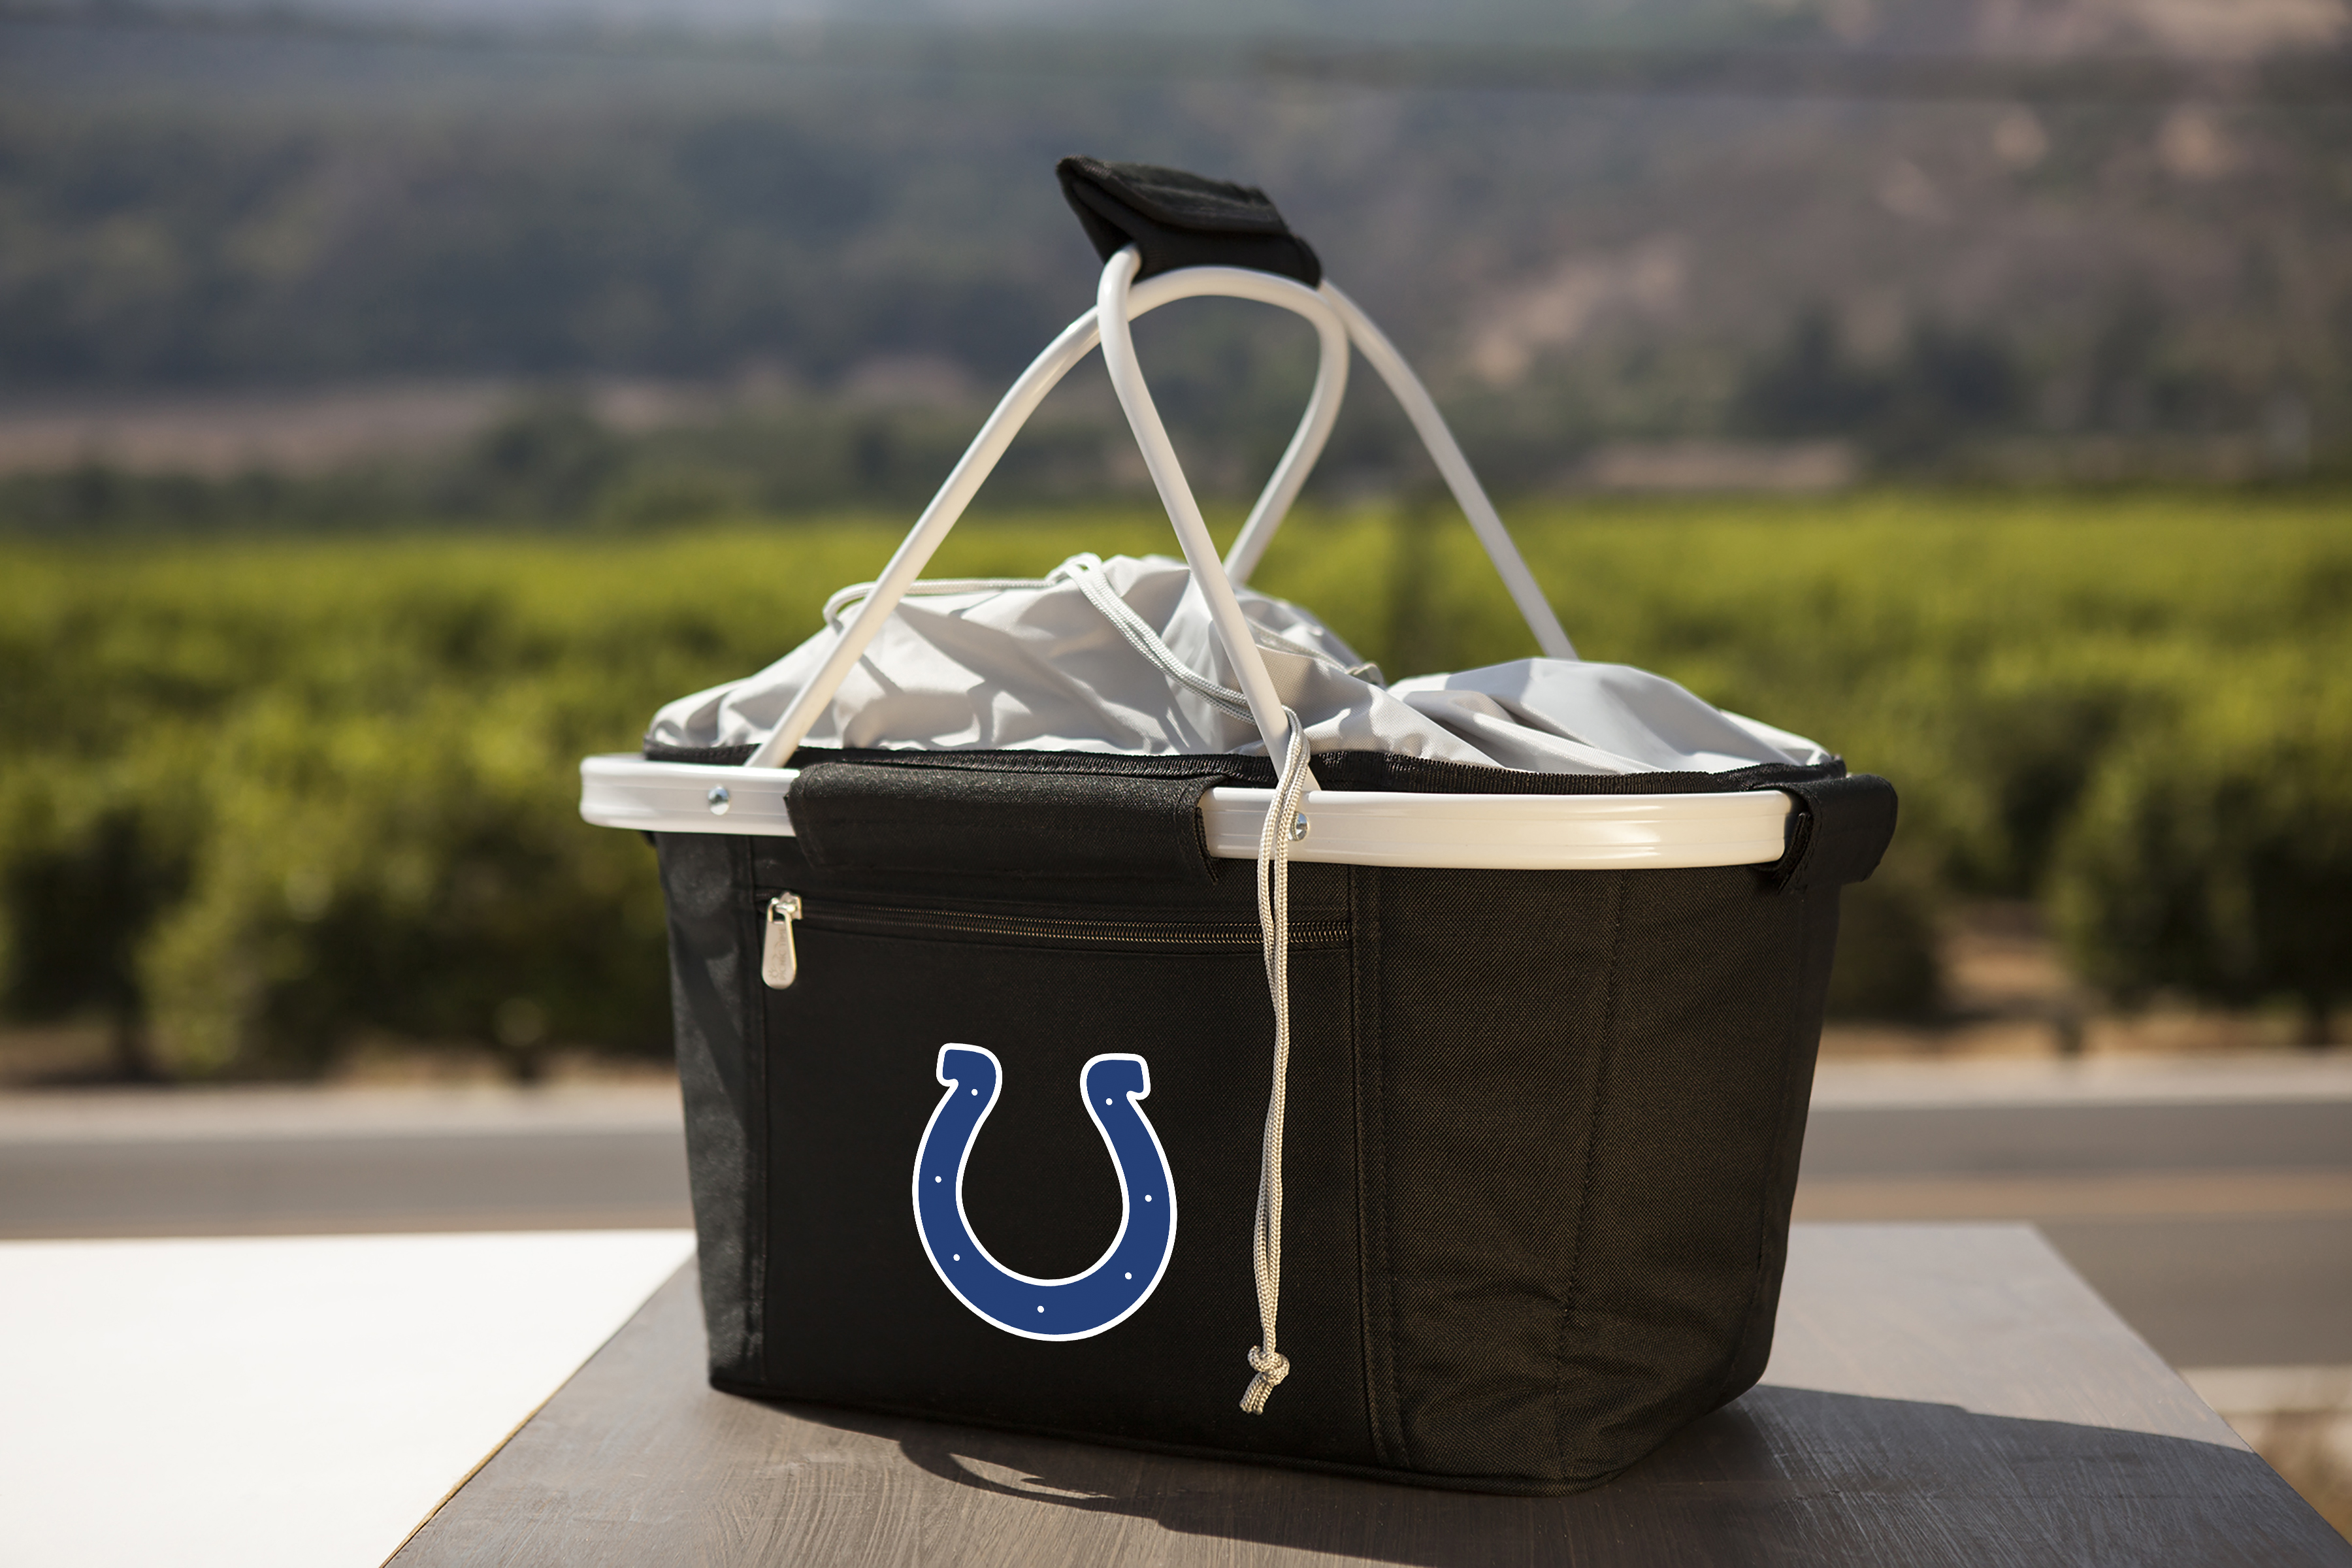 Indianapolis Colts - Metro Basket Collapsible Cooler Tote